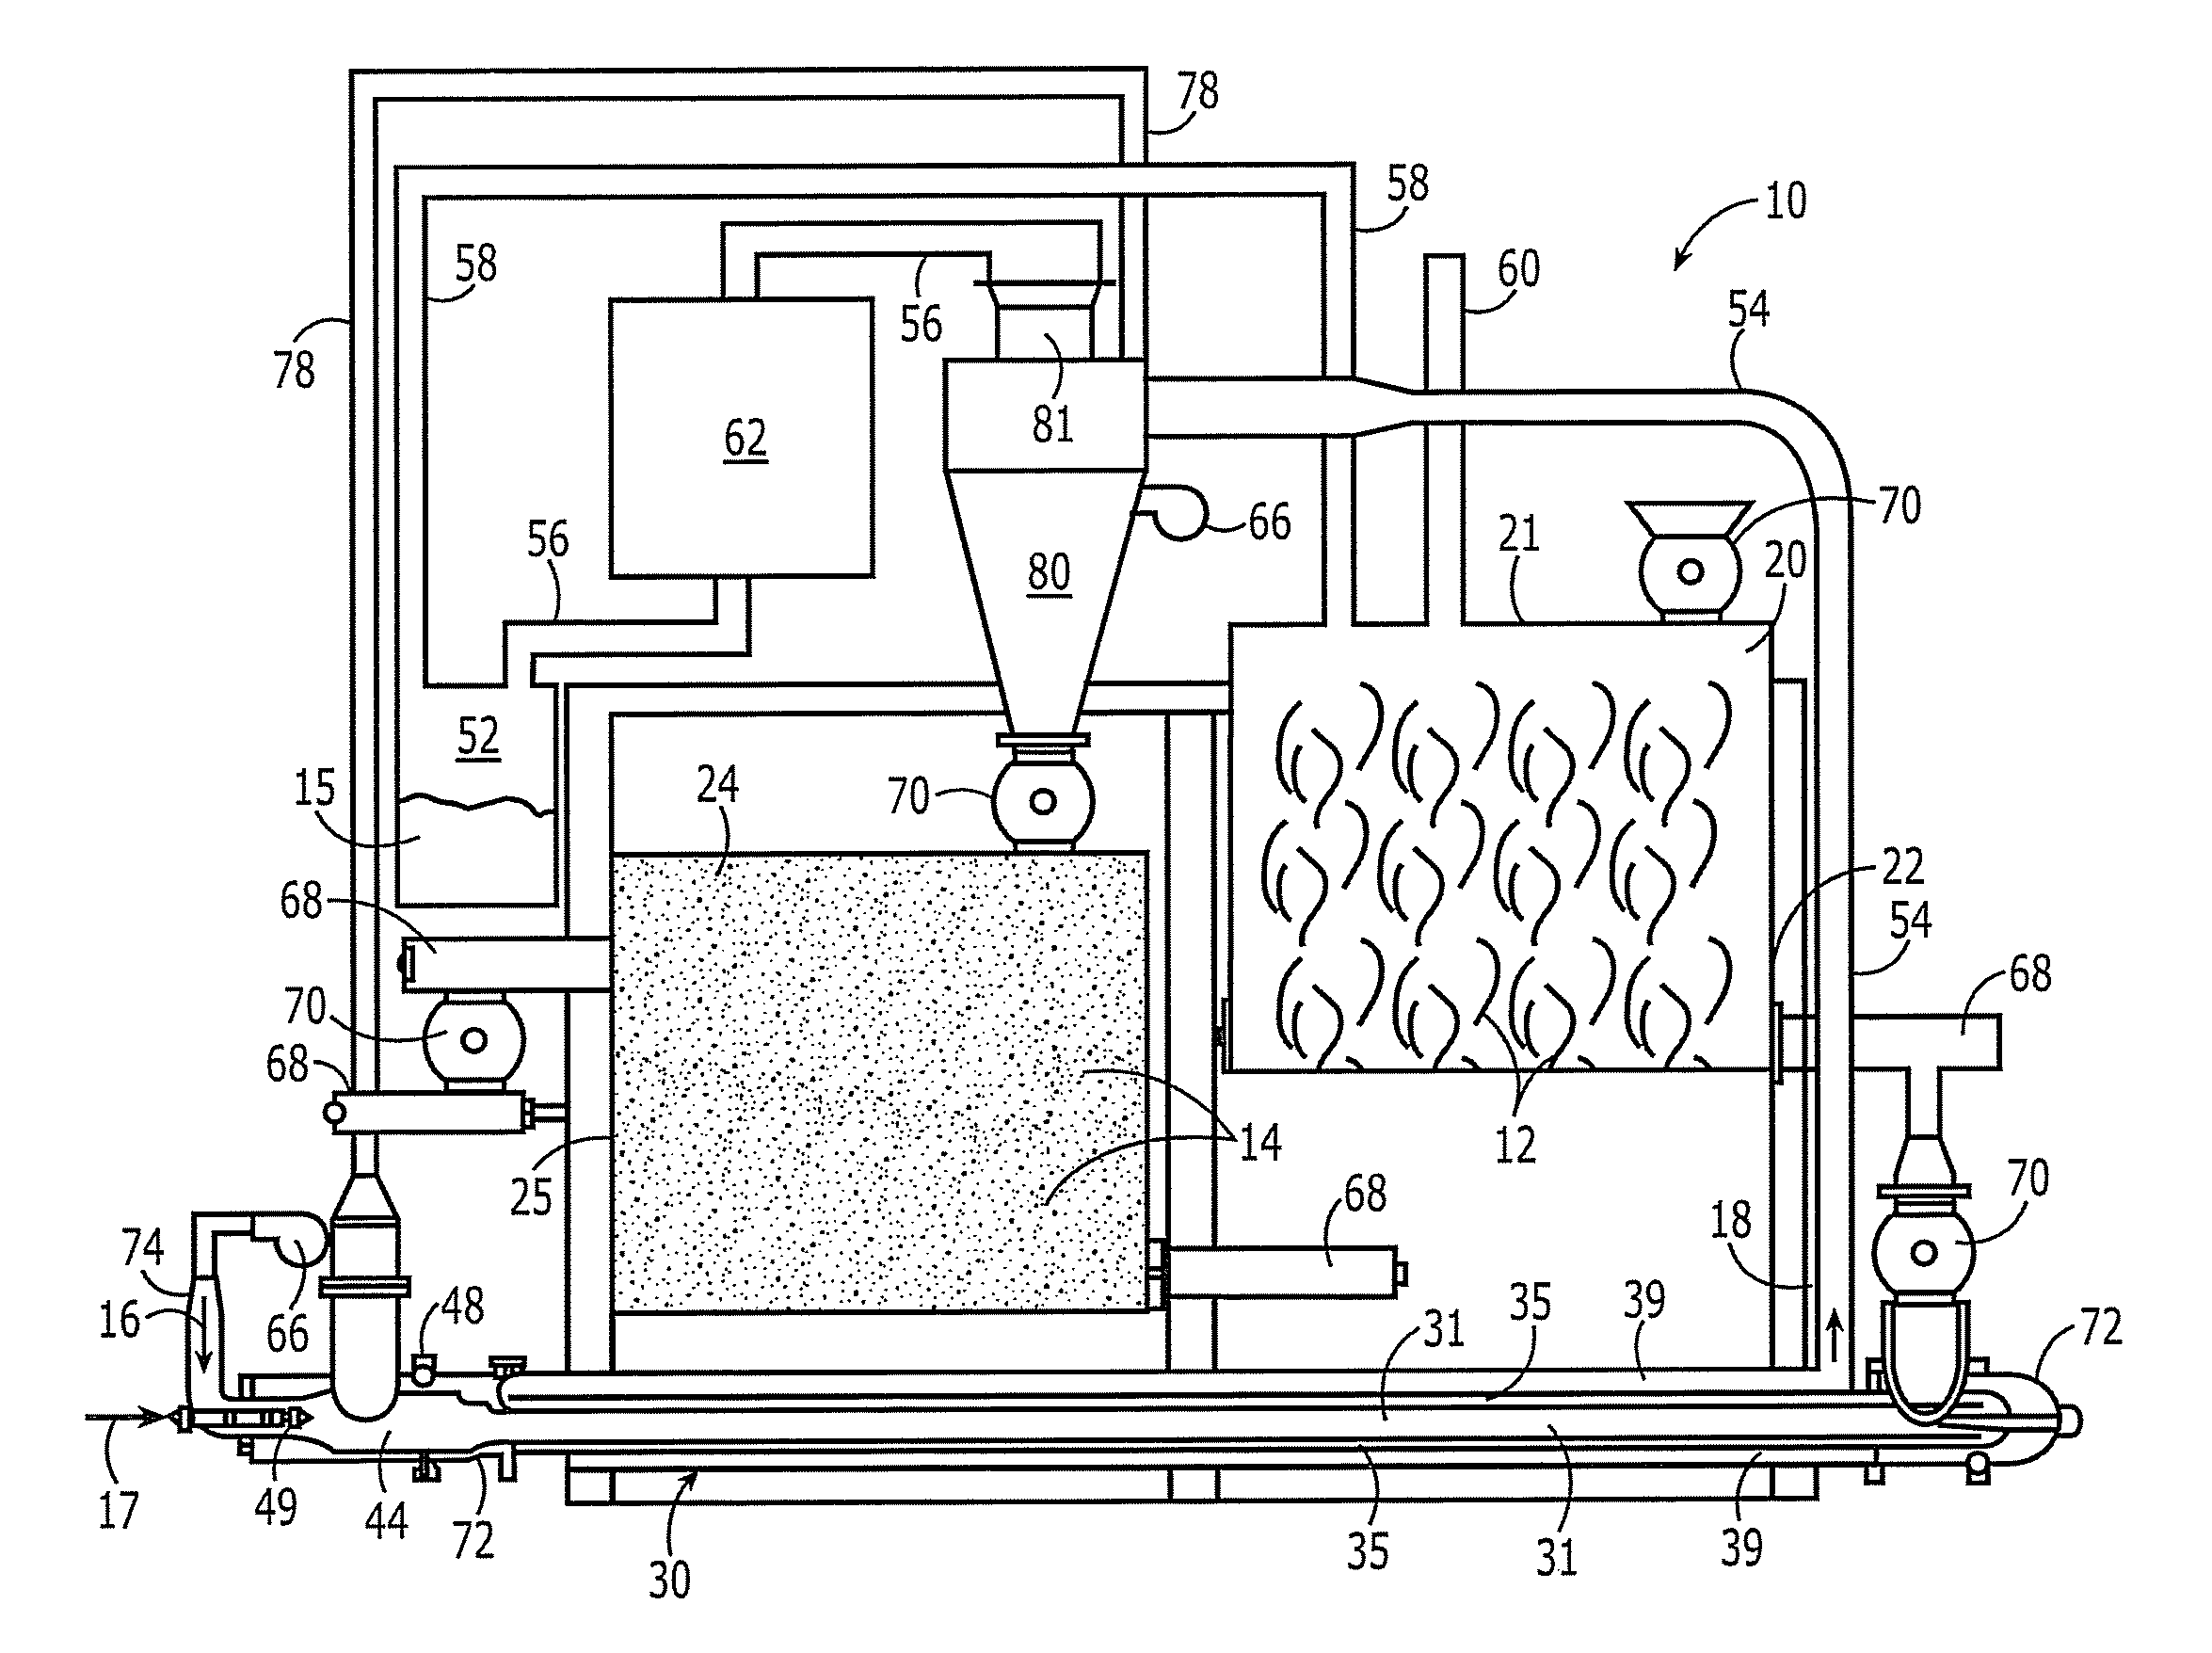 Systems, apparatus and methods for optimizing the production of energy products from biomass, such as sawmill waste